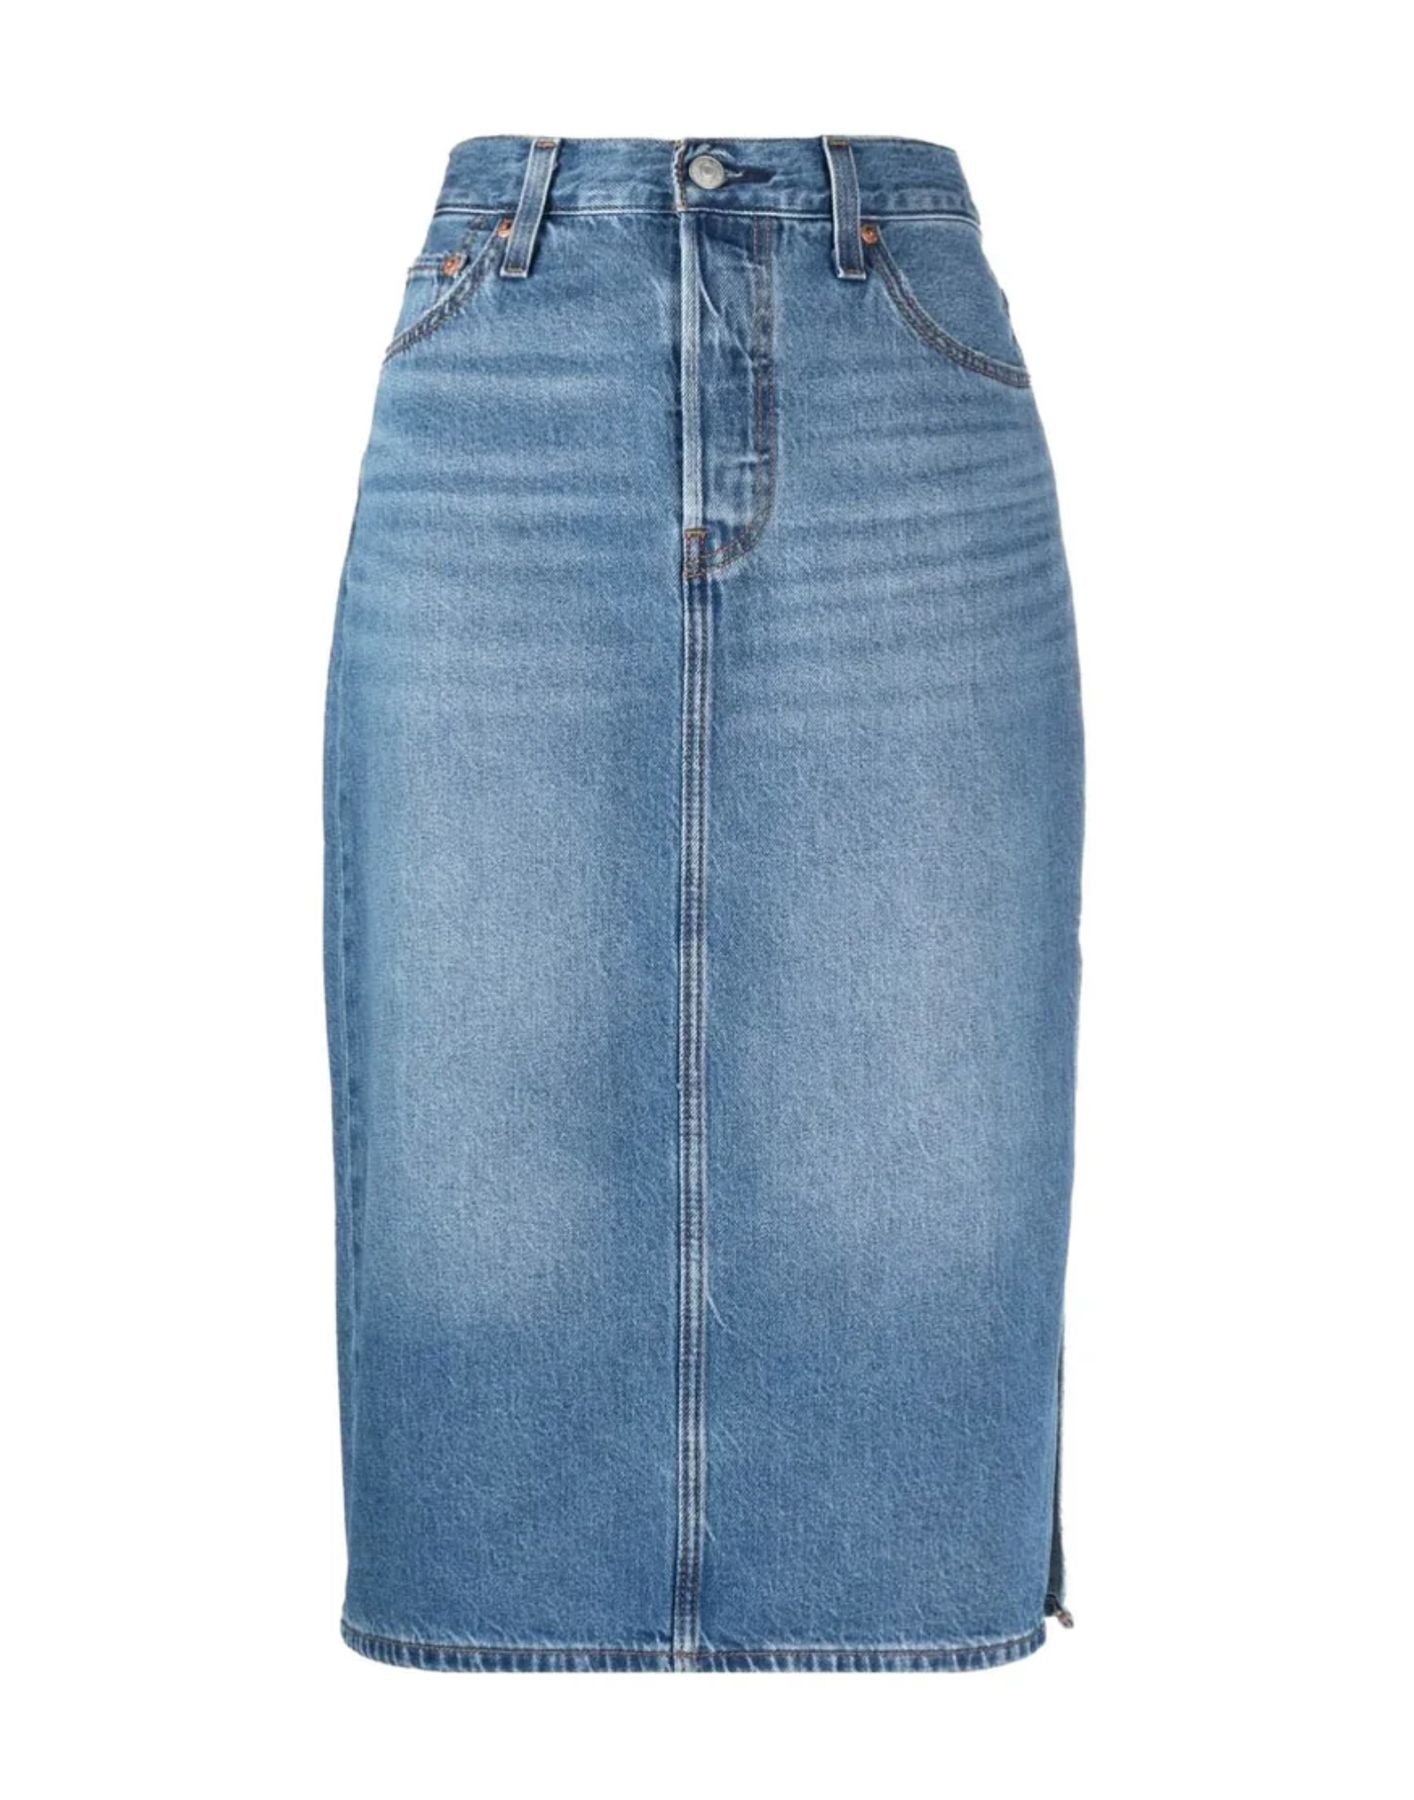 Skirt for woman A4711 0000 blue. Levi's